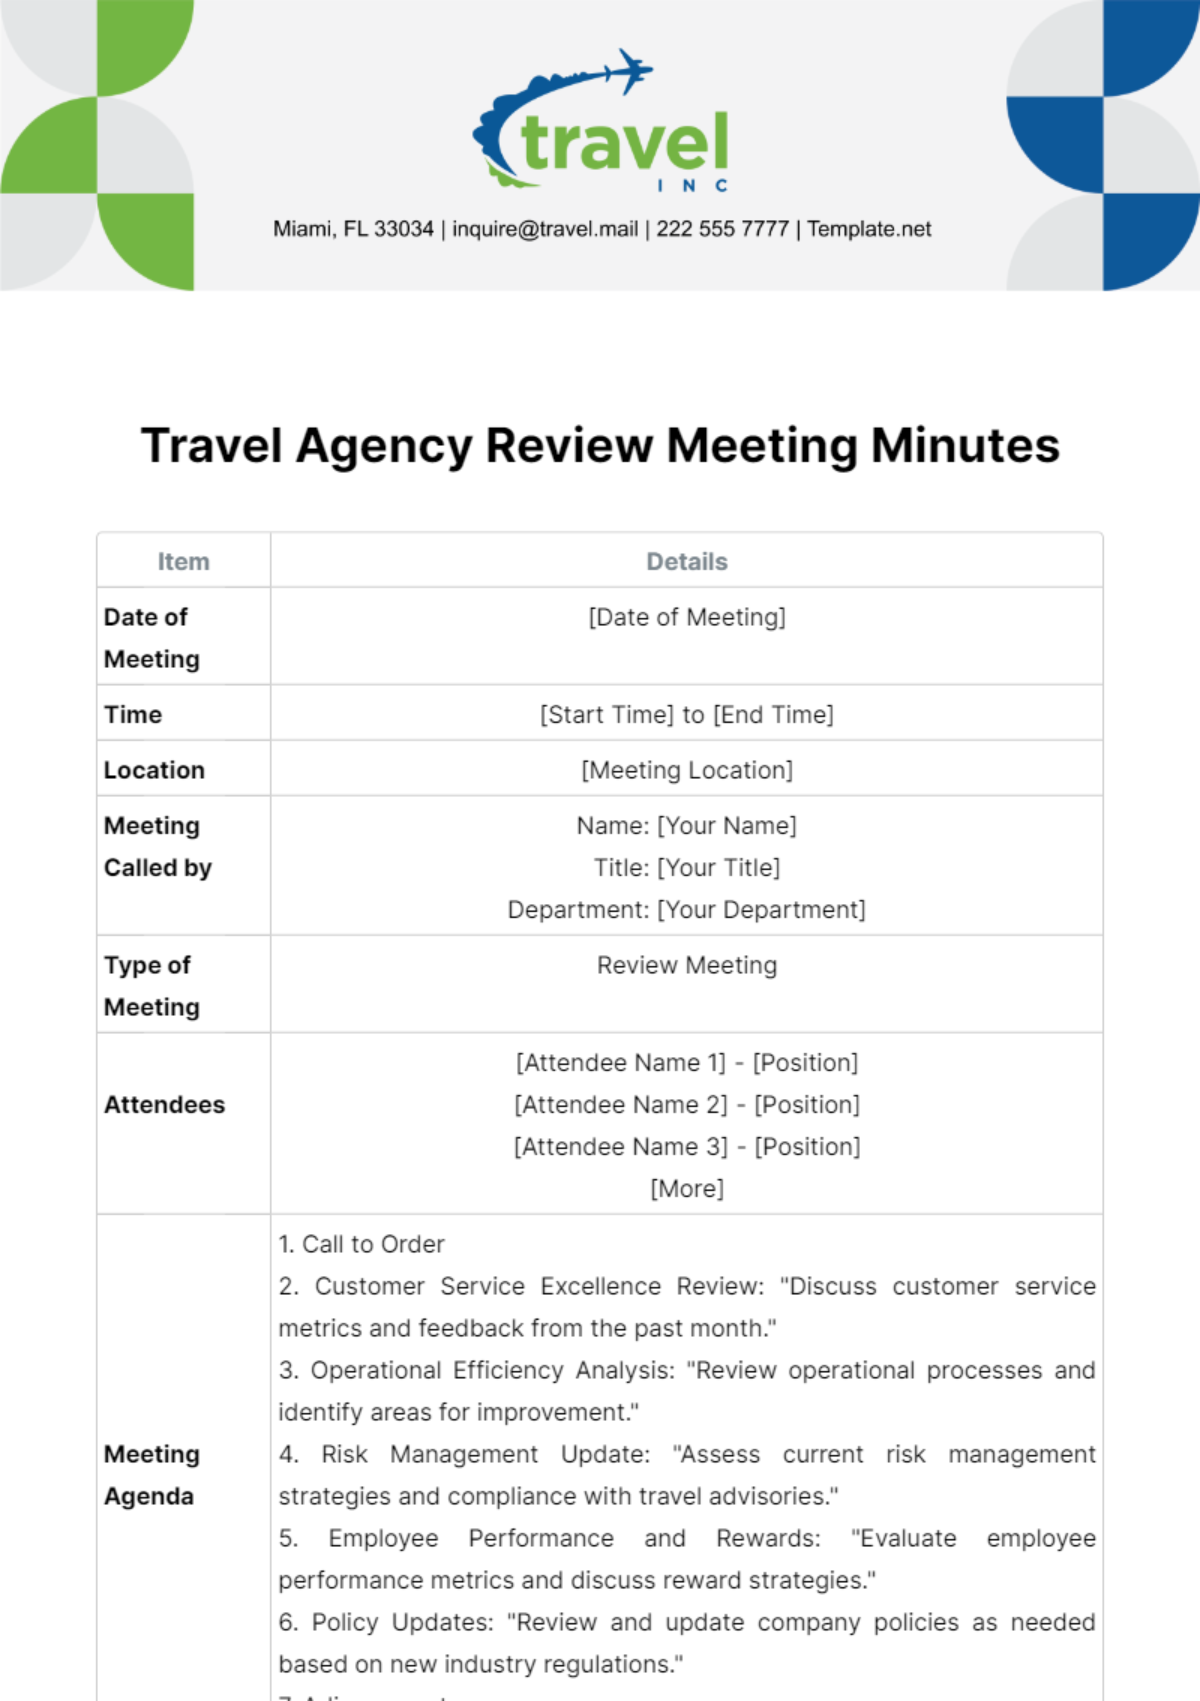 Travel Agency Review Meeting Minutes Template